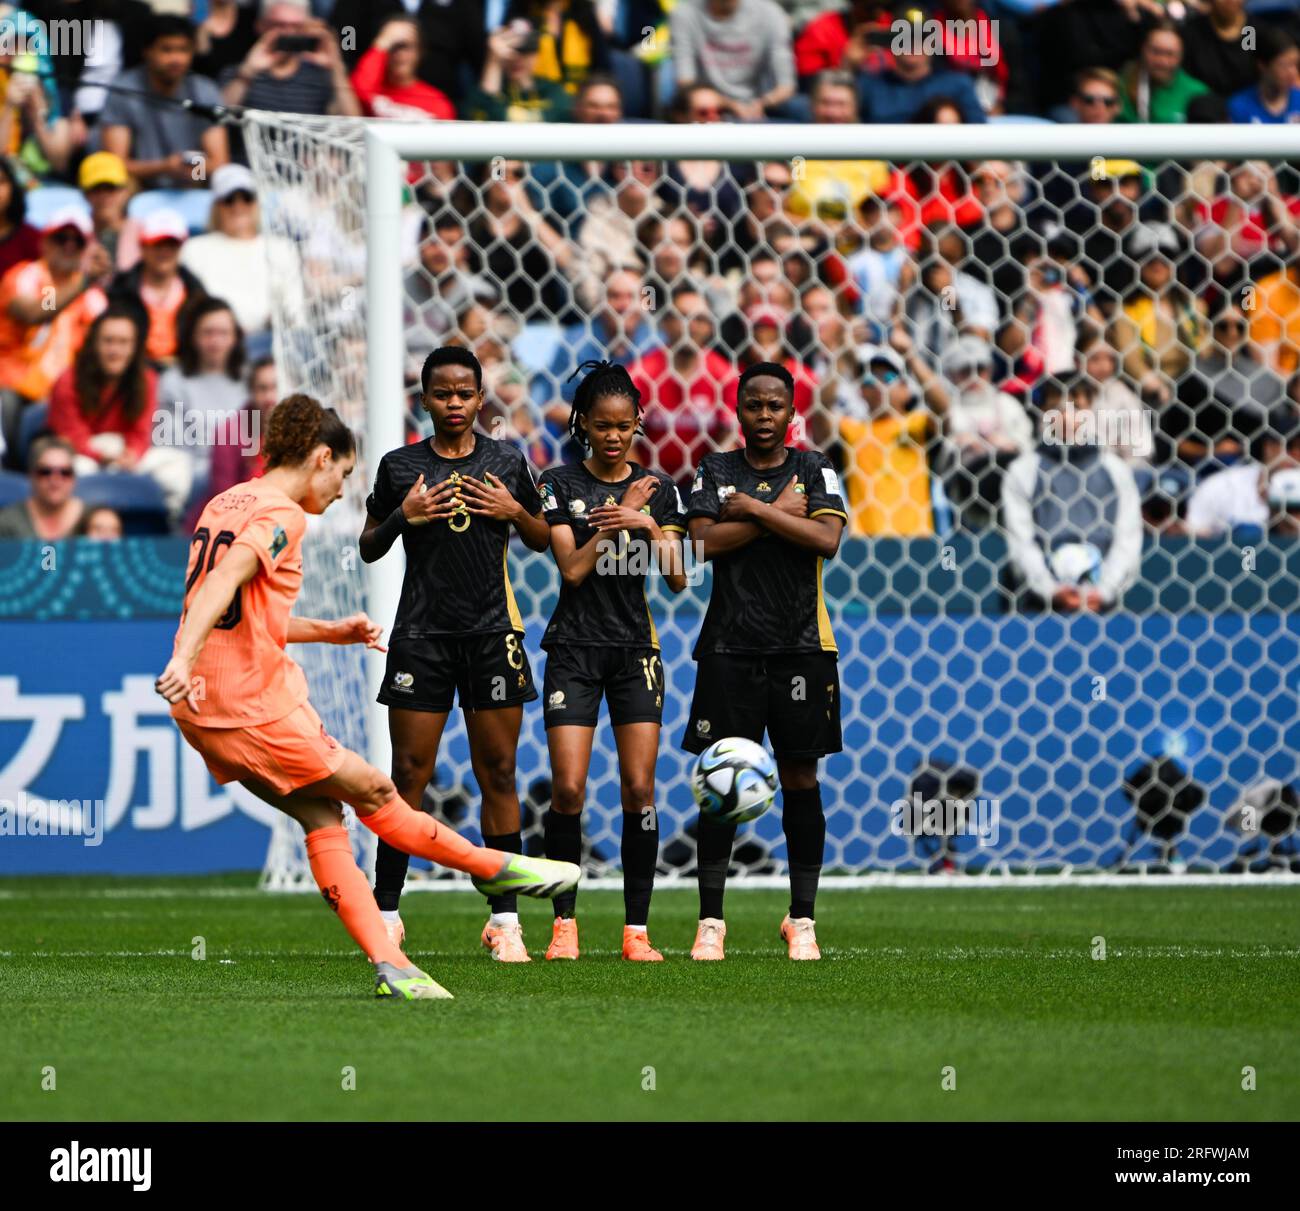 Sydney, Australia 6th August 2023 Netherland's Dominique Janssen taking a free kick at the 2023 FIFA Women's World Cup round of 16 match as they defeat South Africa 2-0 at the Sydney Football Stadium in Sydney, Australia (Kleber Osorio) Credit: Kleber Osorio/ Alamy Live News Stock Photo